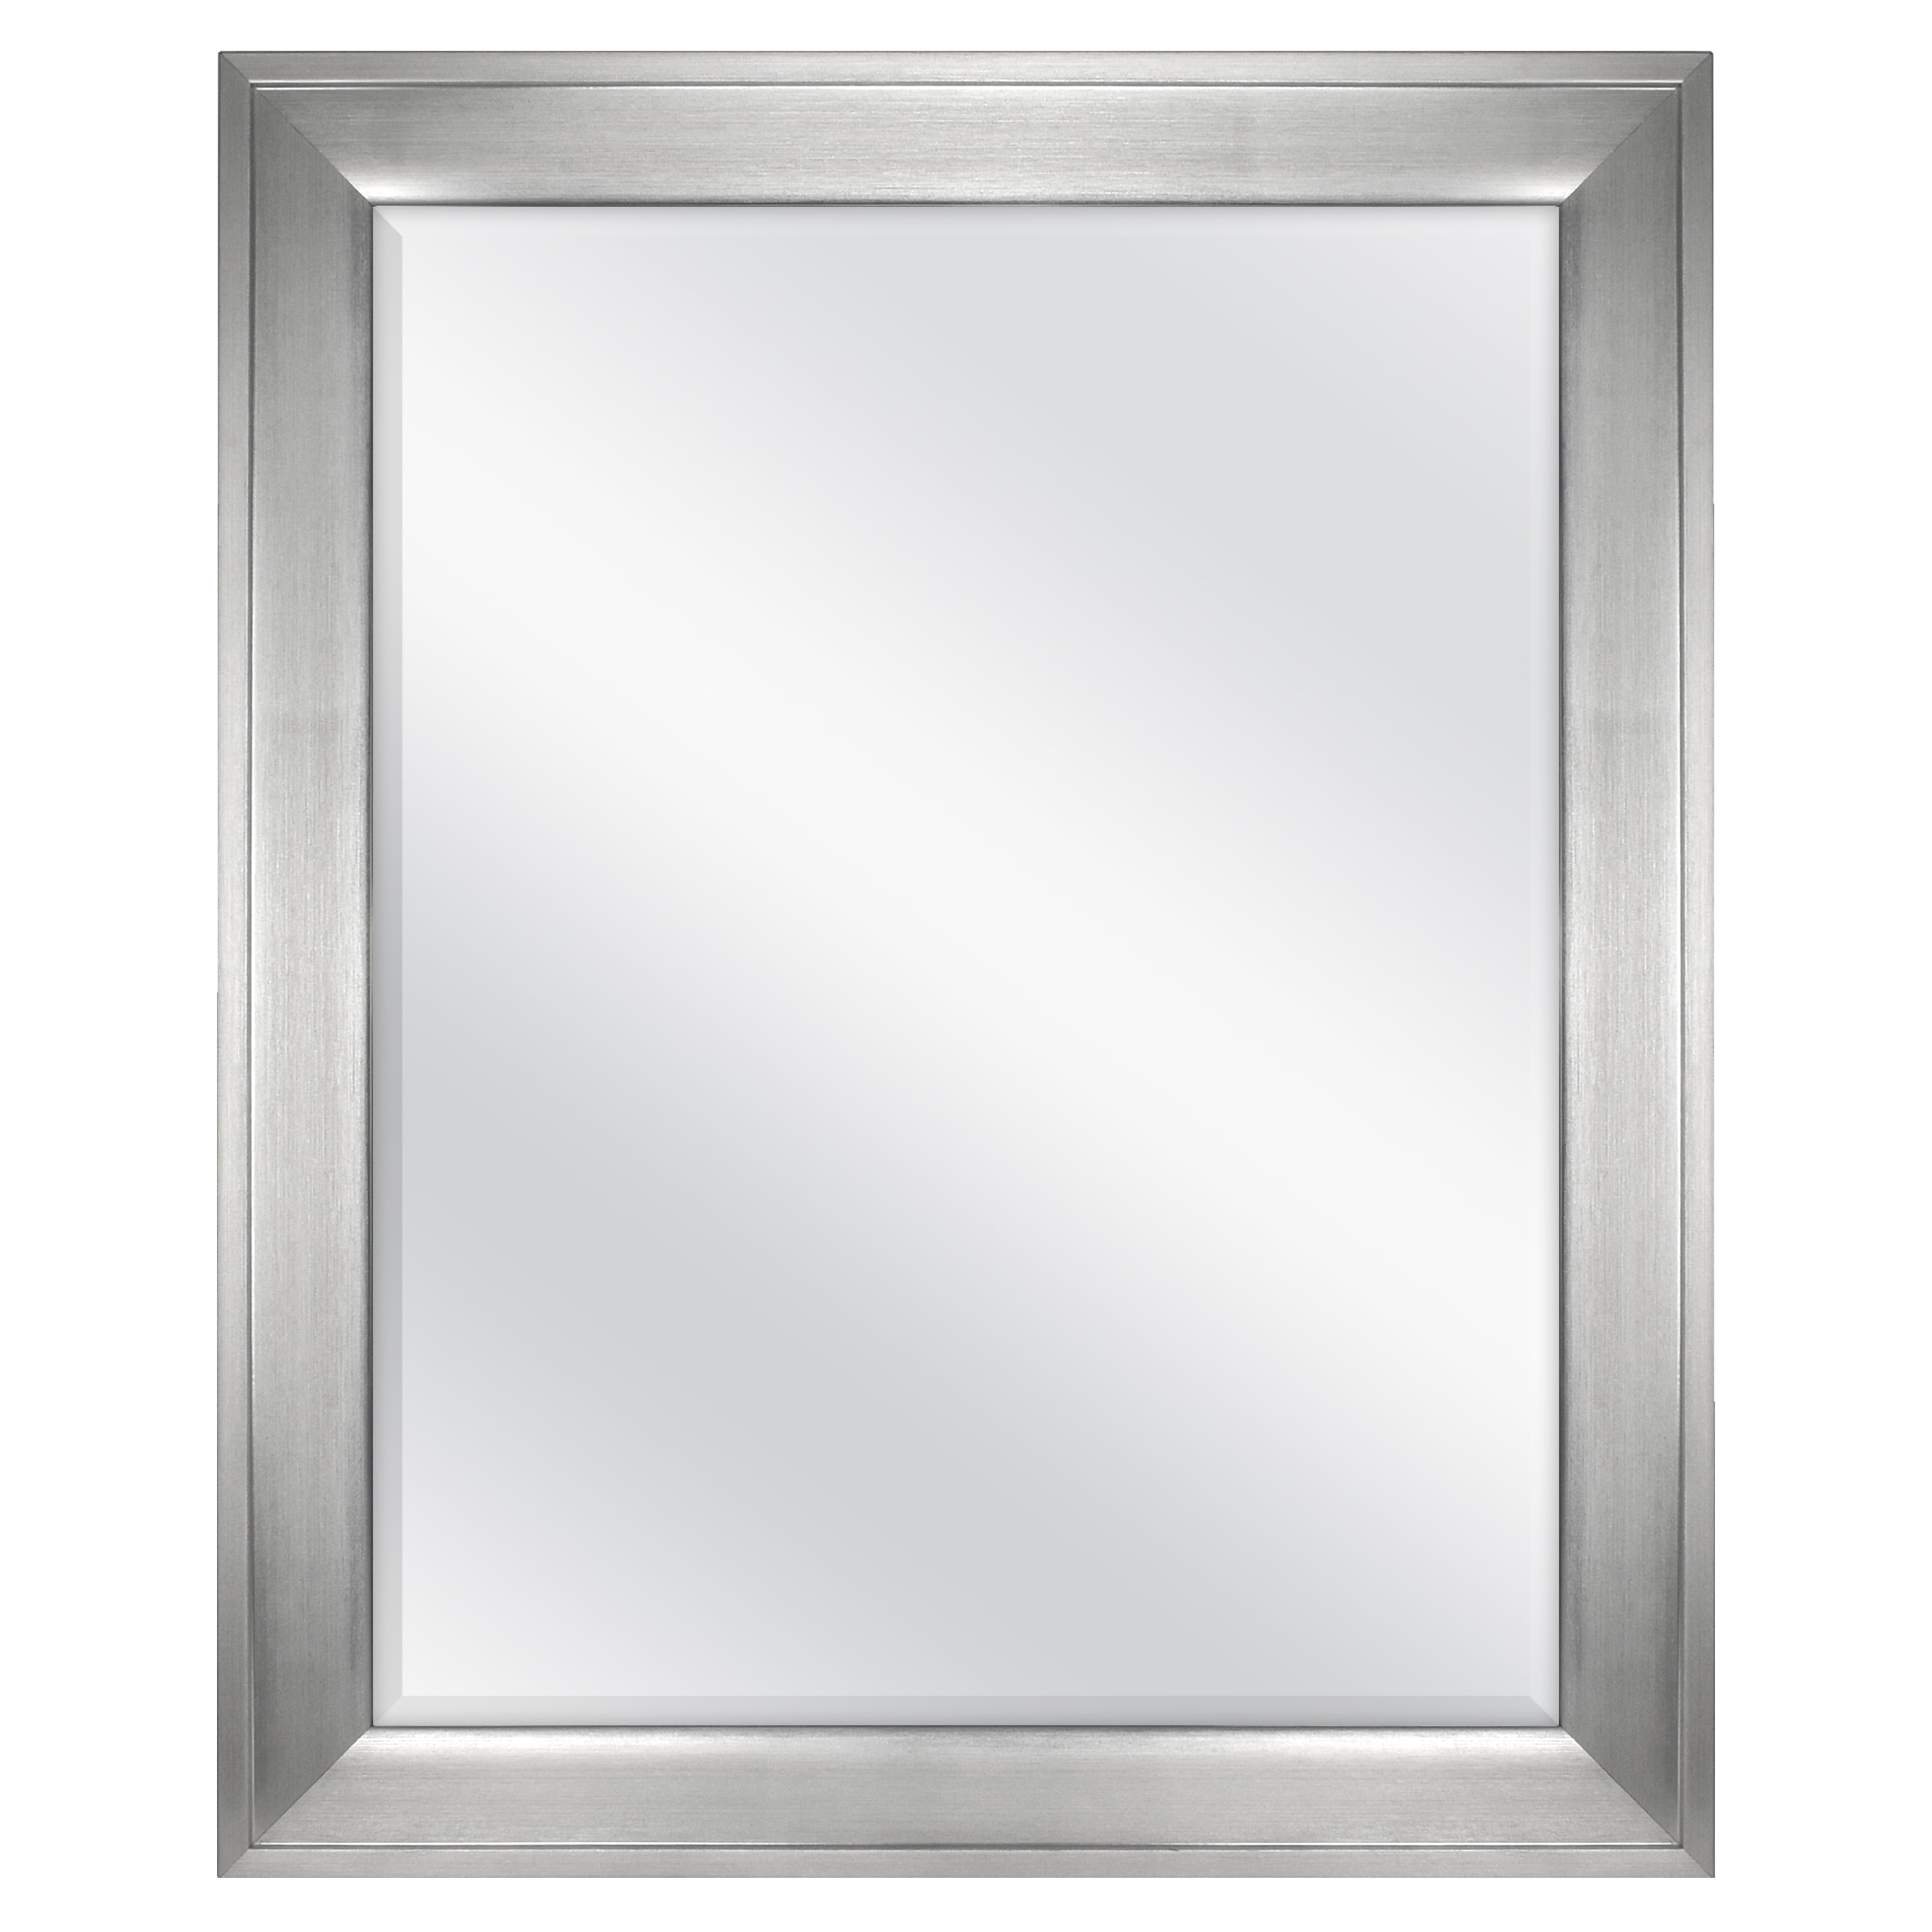 Mainstays 27x33 Silver Beveled, How To Hang Mainstays Beveled Mirror